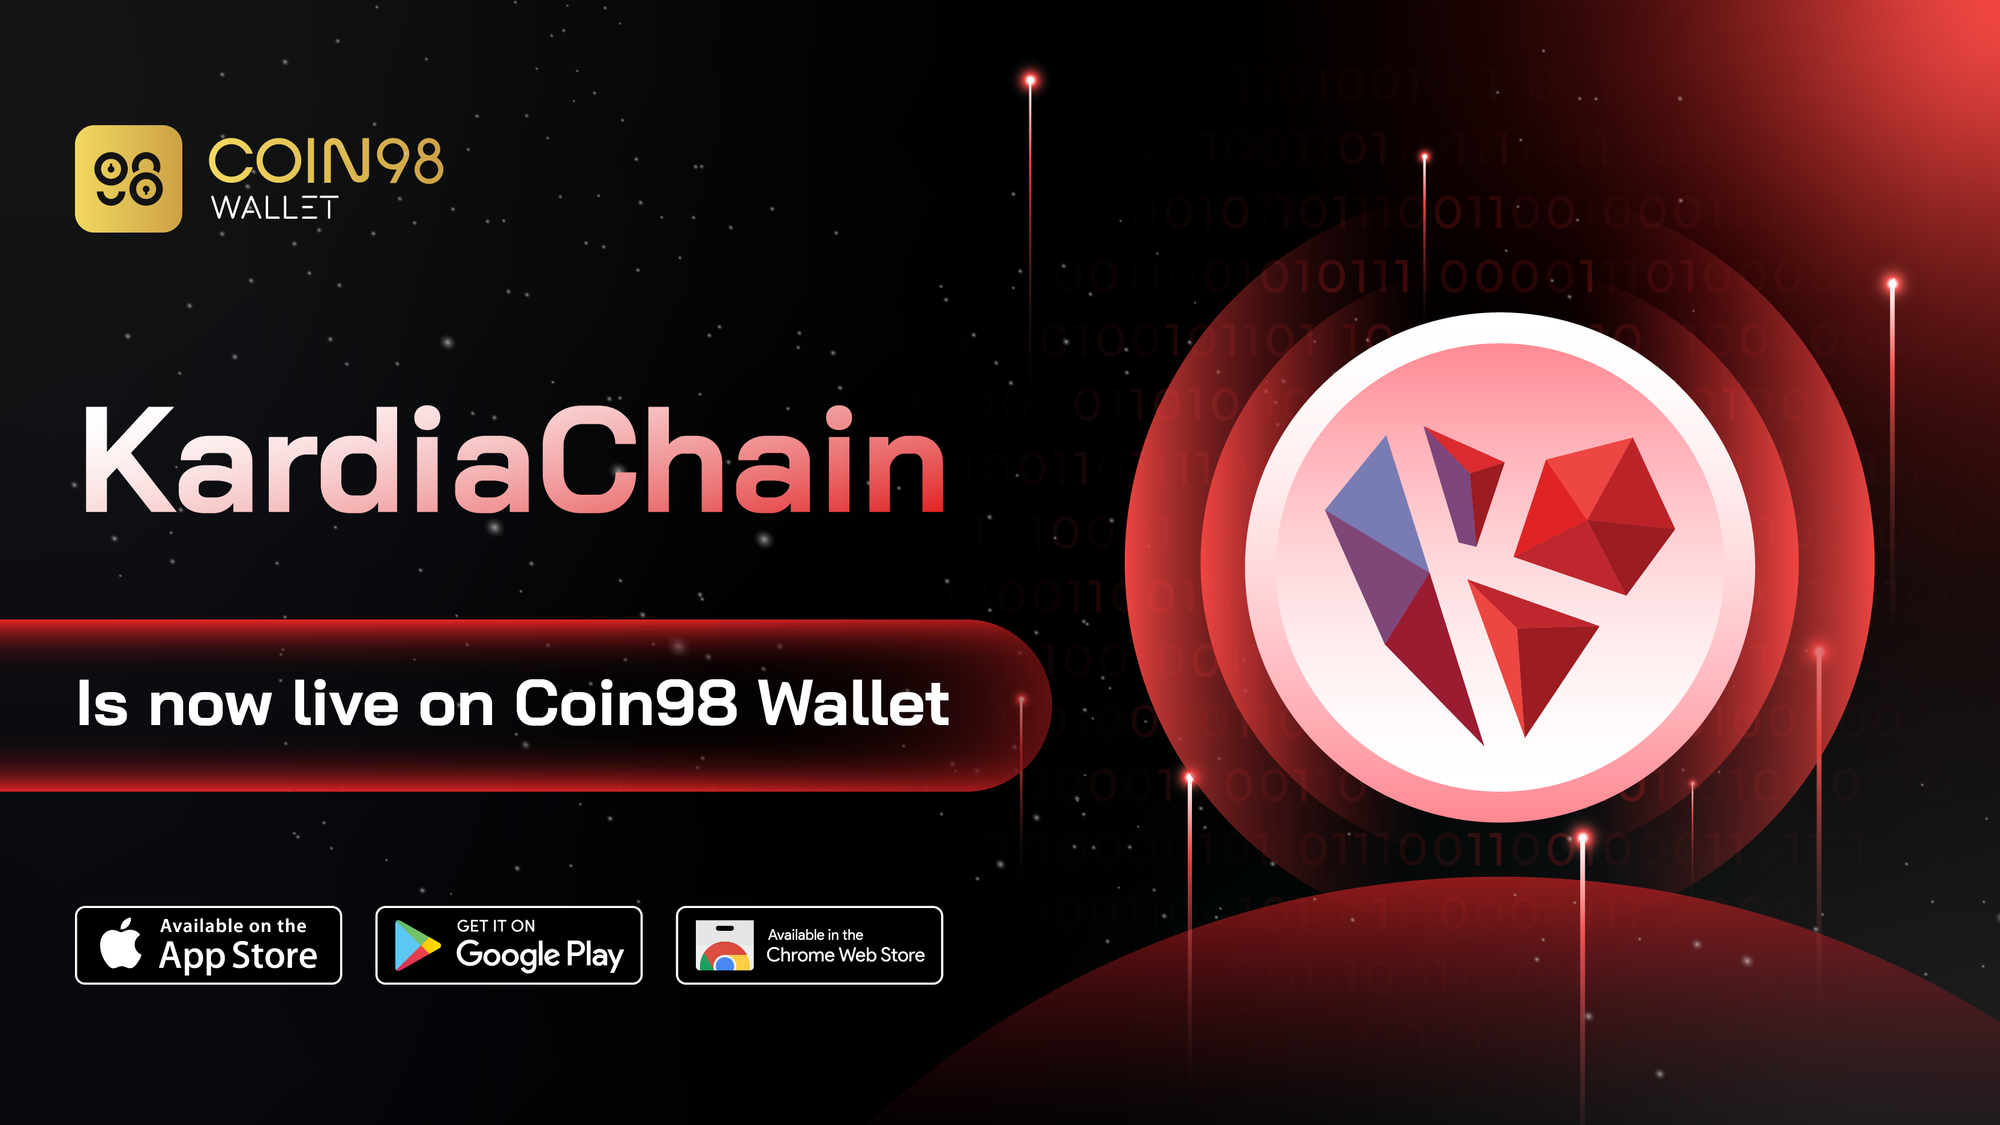 Coin98 Wallet now integrates KardiaChain to fuel the Cross-Chain future